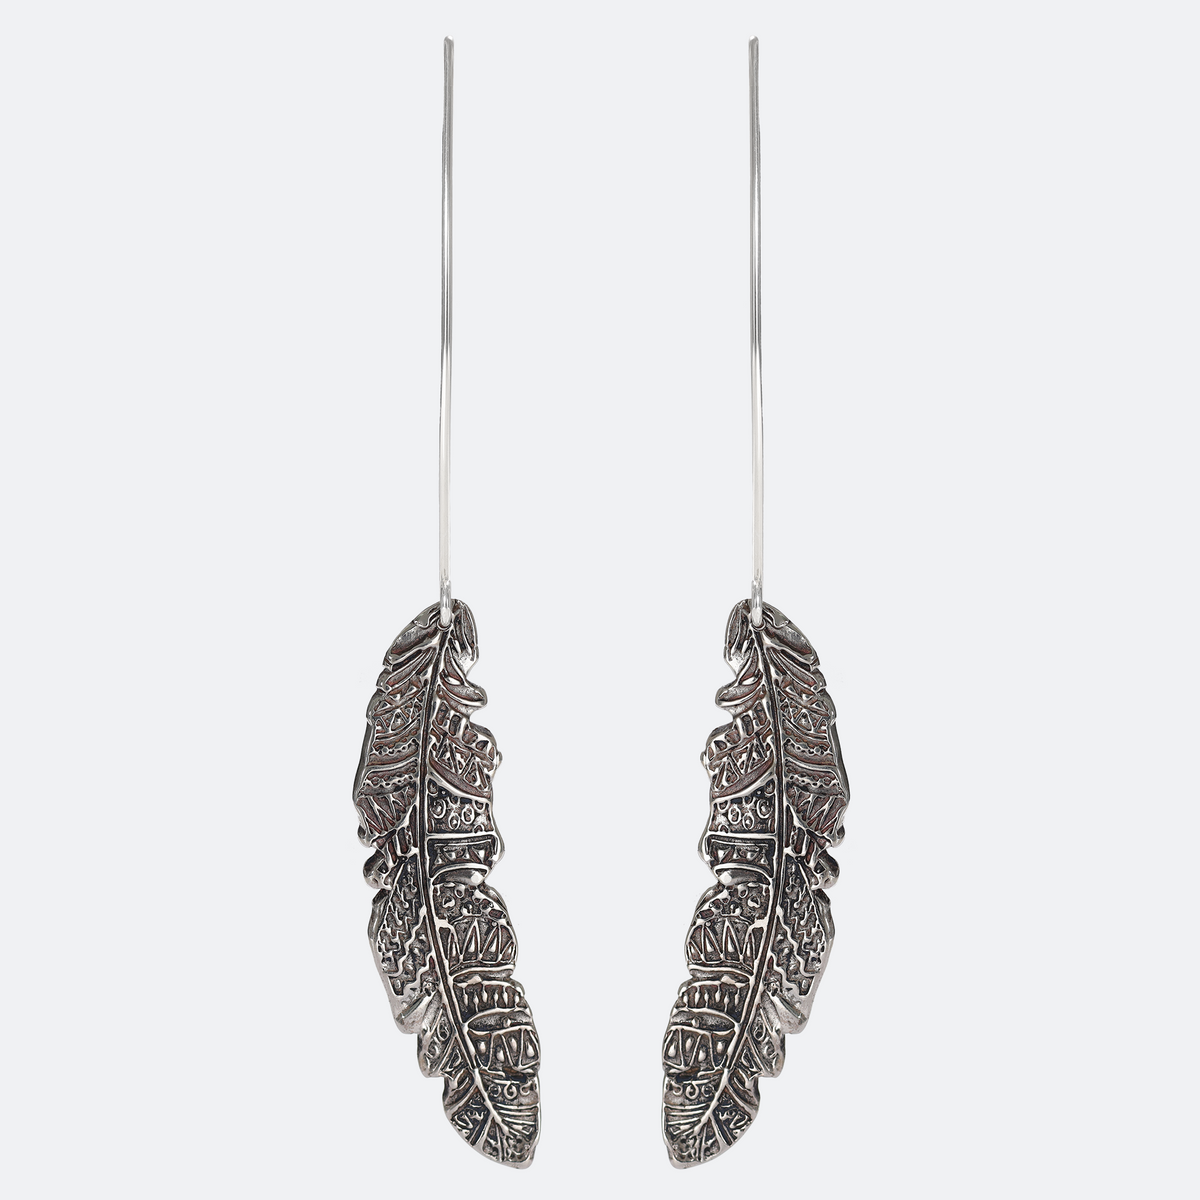 Feather Textured Large Sterling Silver Earrings on Long Ear Wires